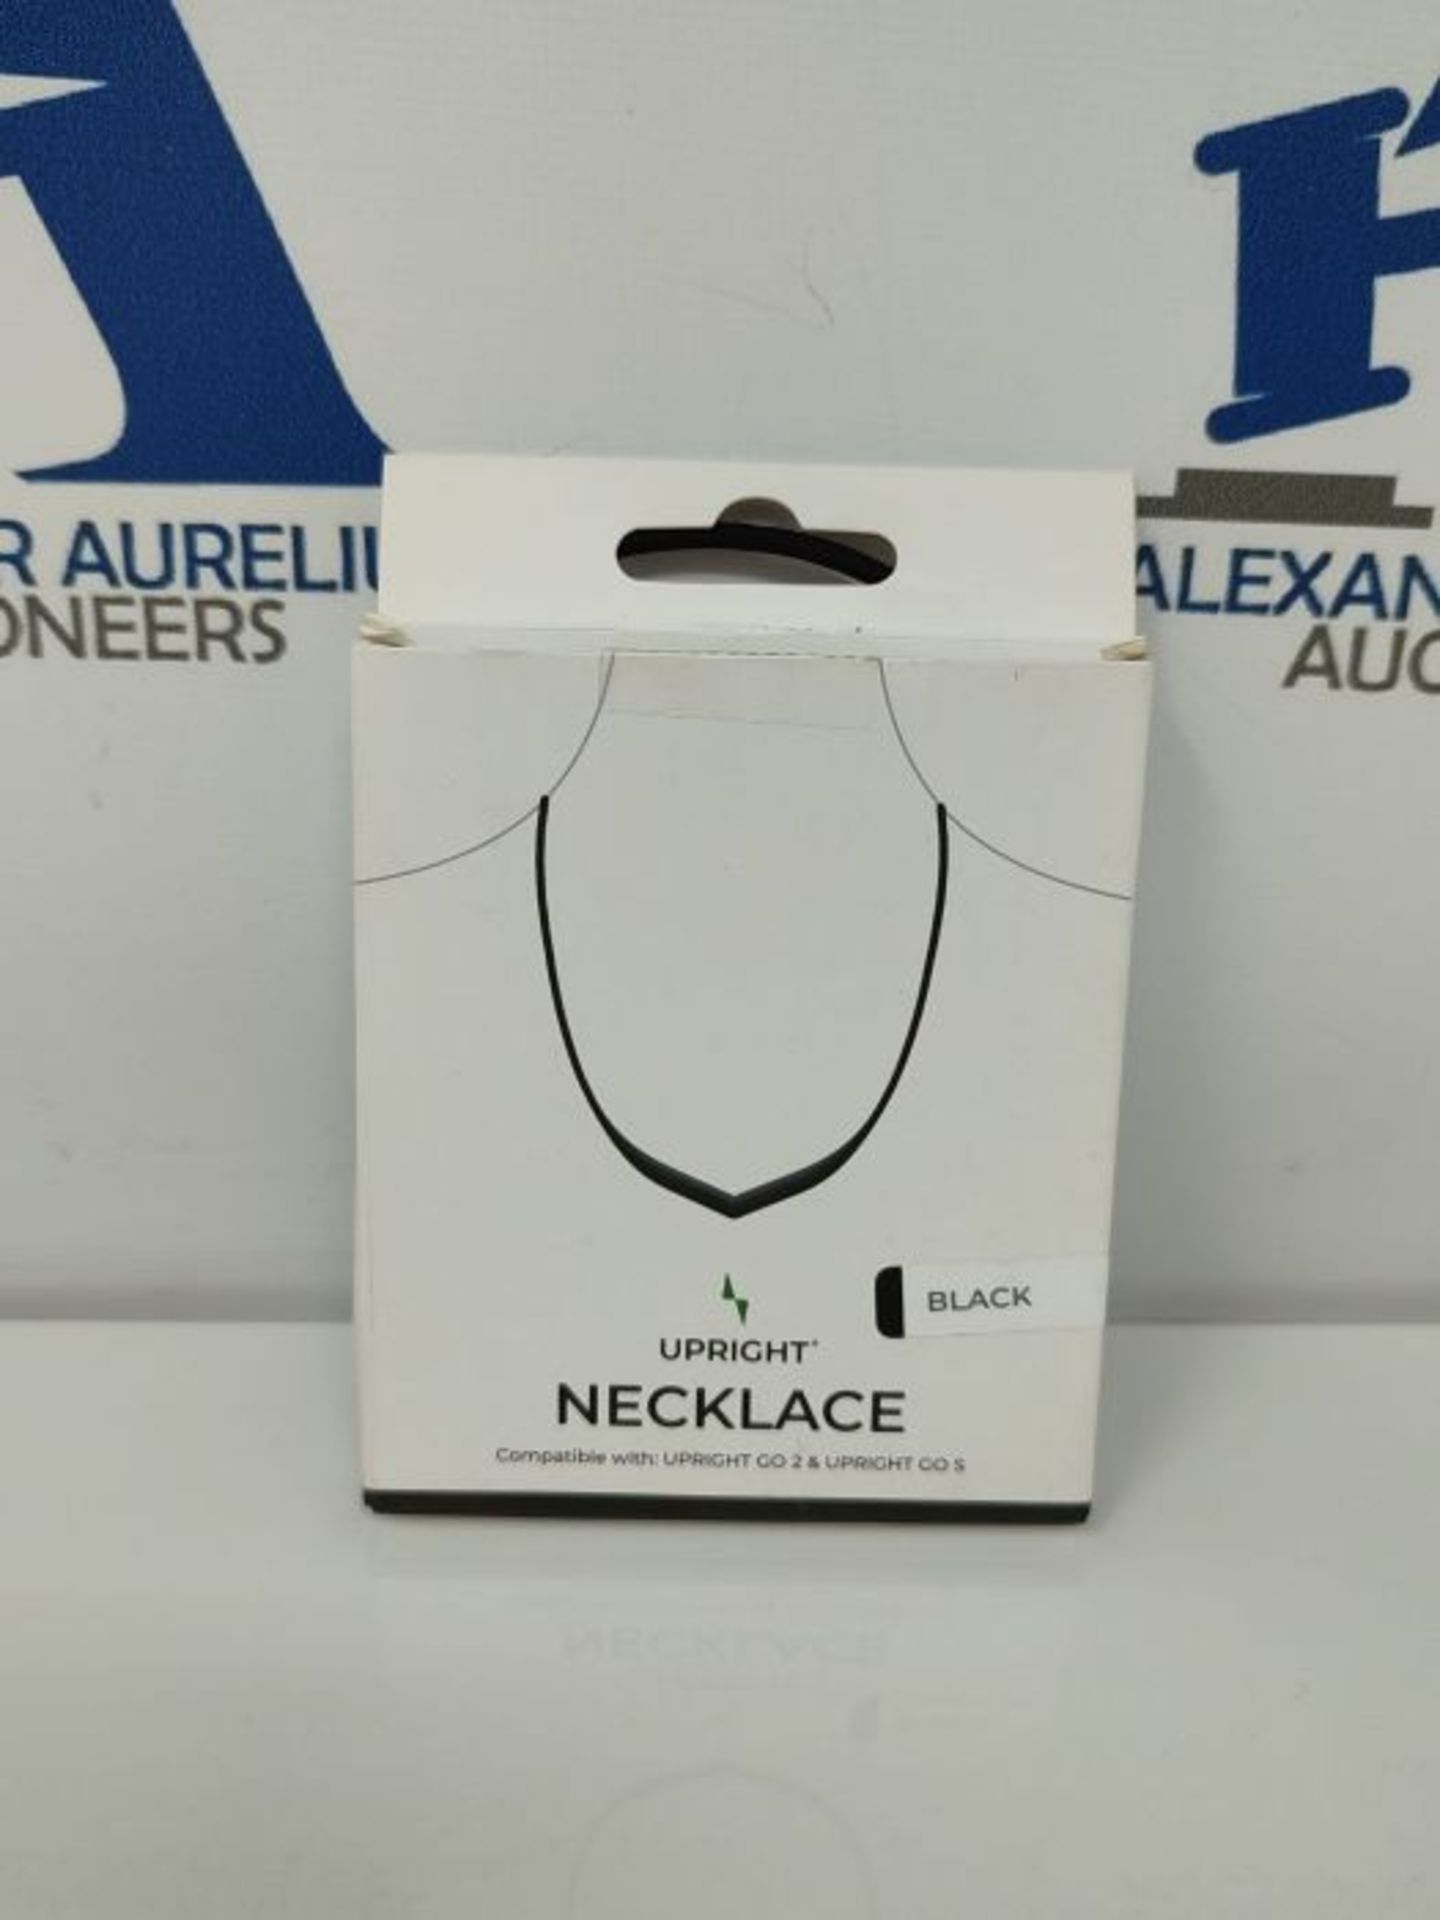 Upright Necklace | New Necklace Accessory Go 2 and Go S Posture Trainer (not compatibl - Image 2 of 3